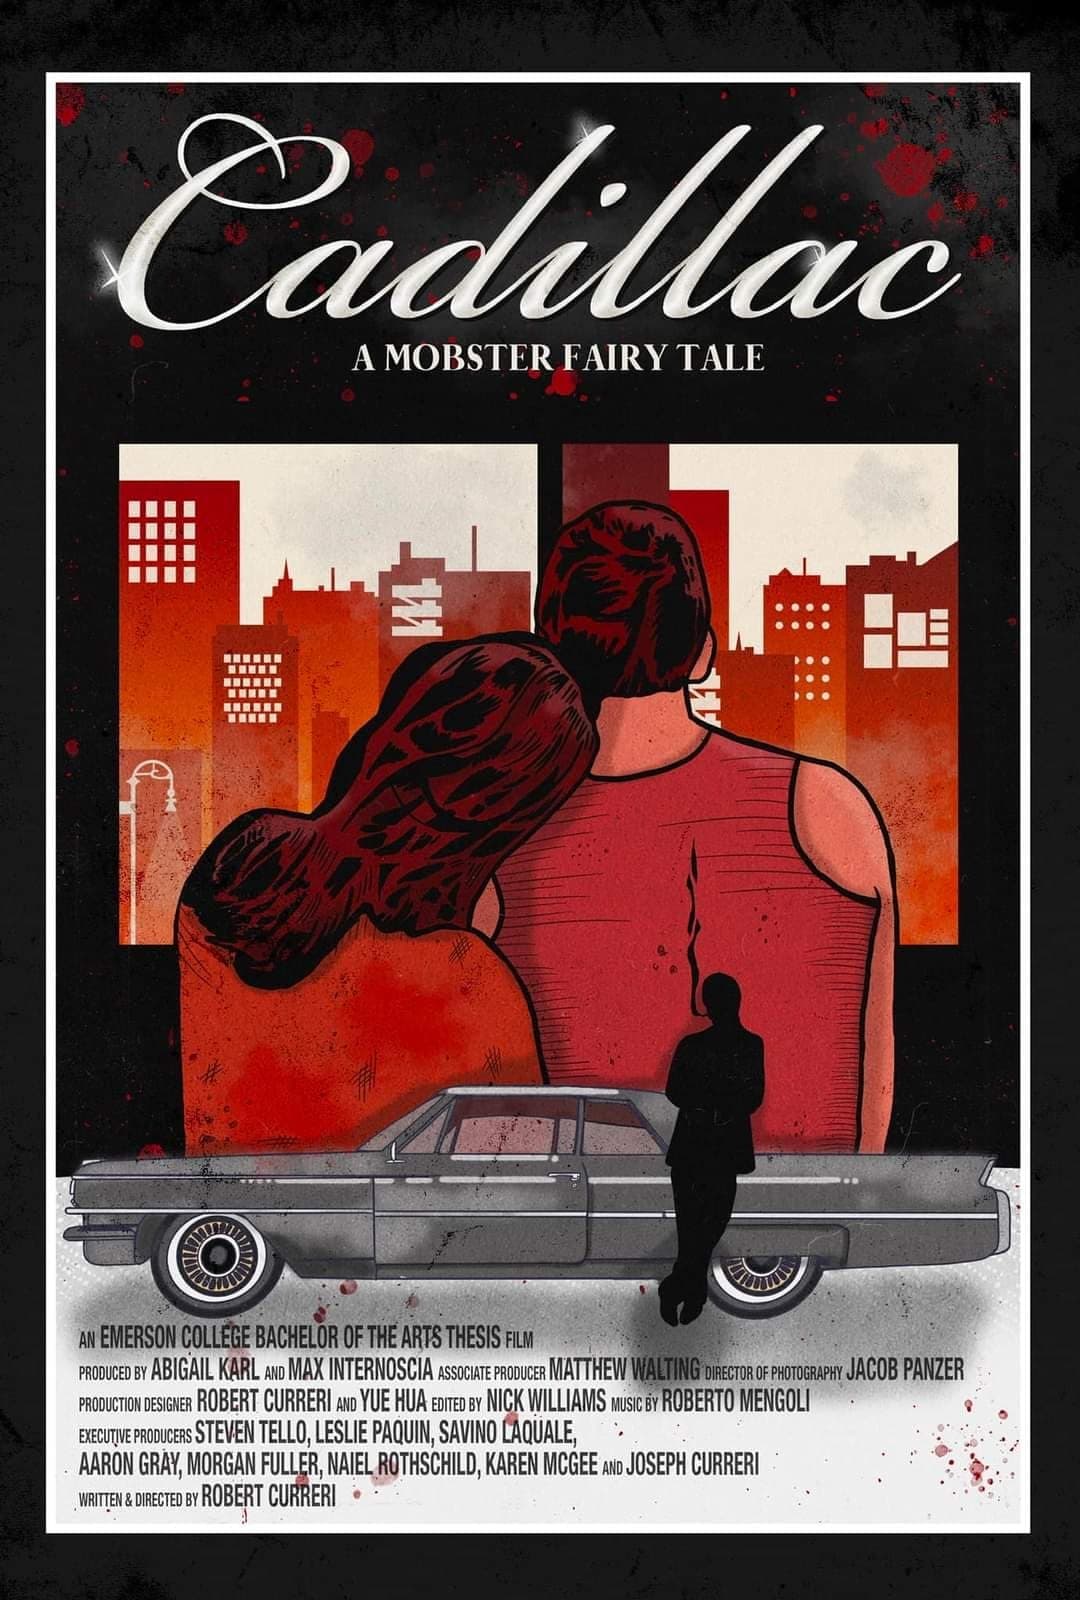 Cadillac: A Mobster Fairy Tale